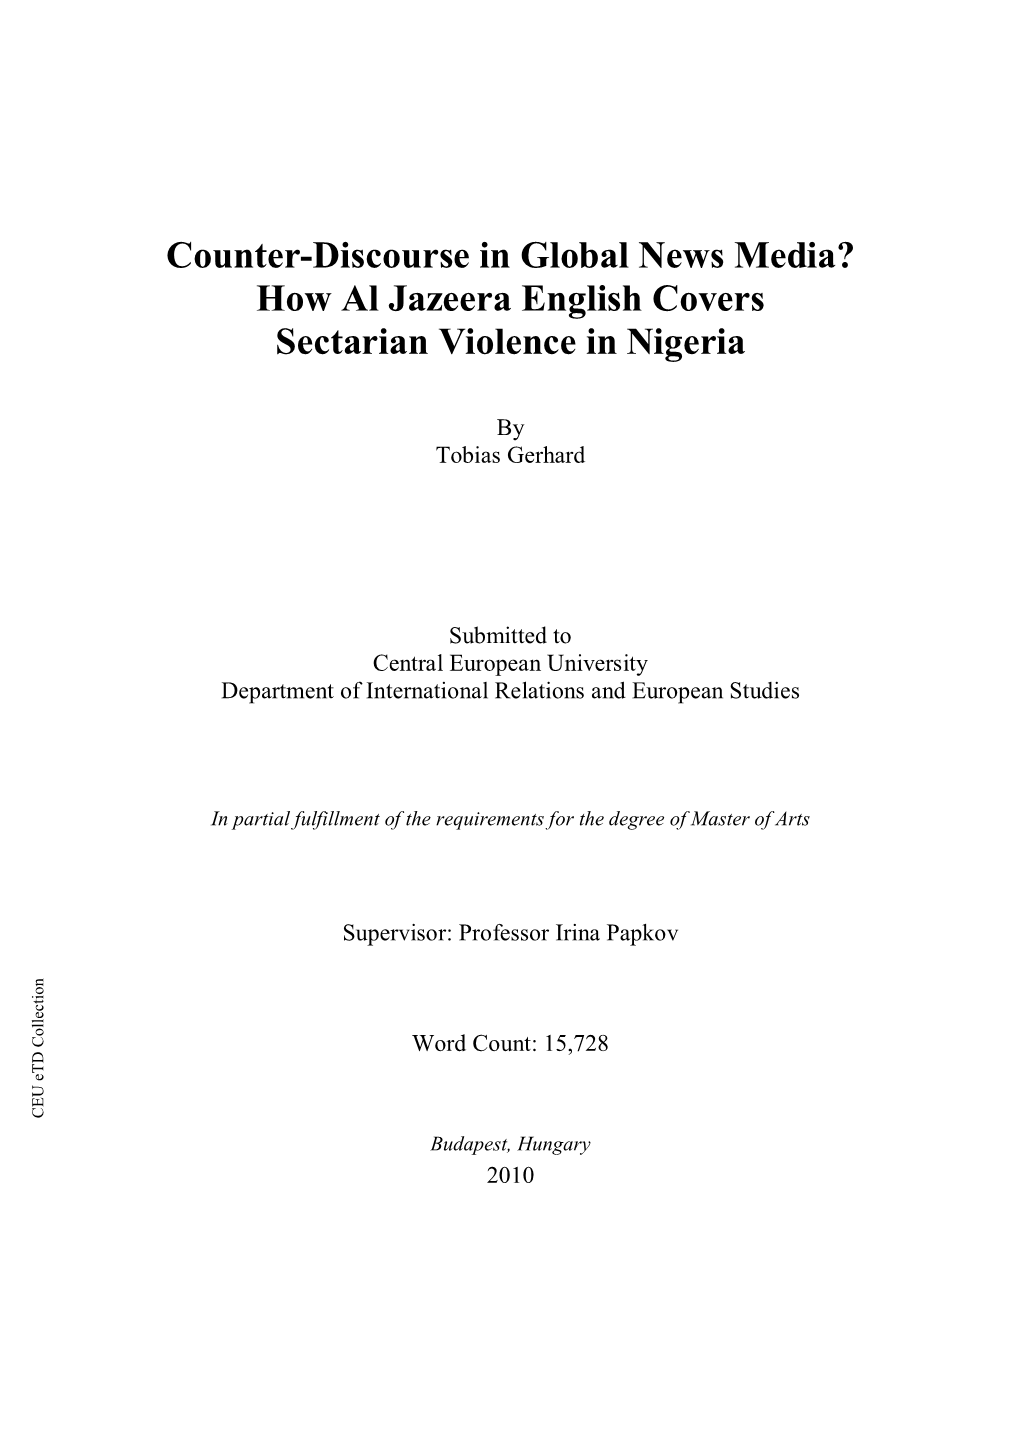 Counter-Discourse in Global News Media